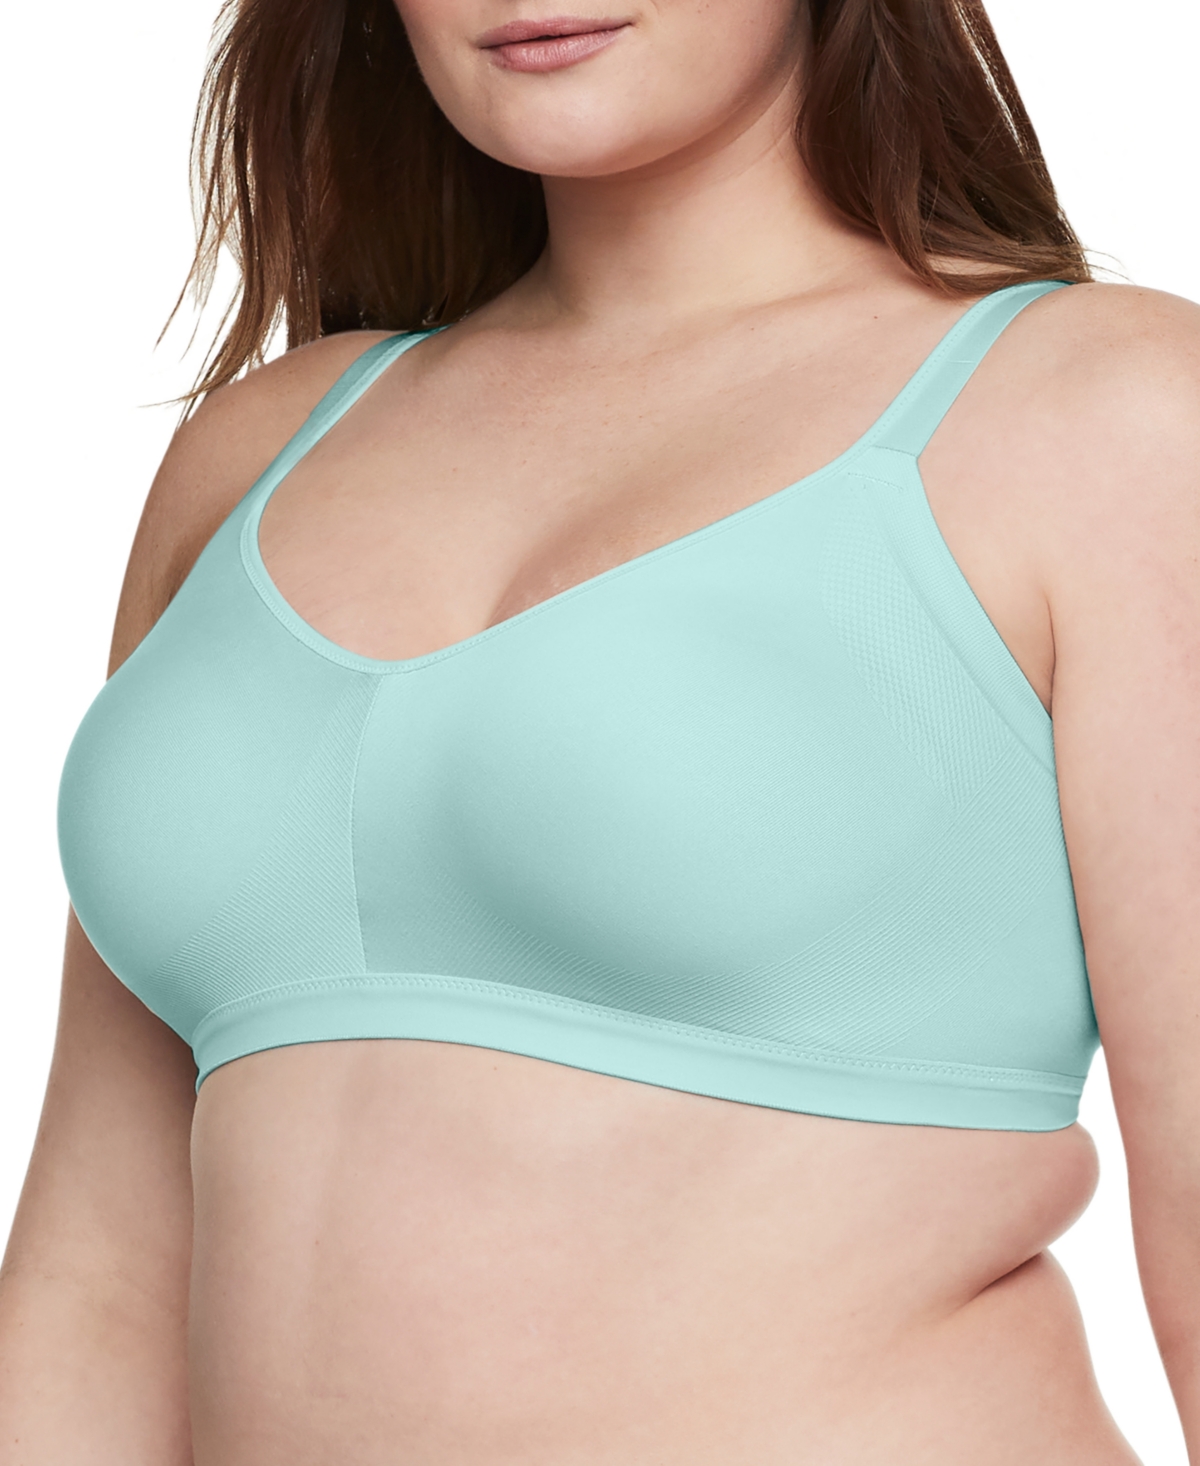 Olga Easy Does It Full Coverage Smoothing Bra Gm3911a In Summer Sky